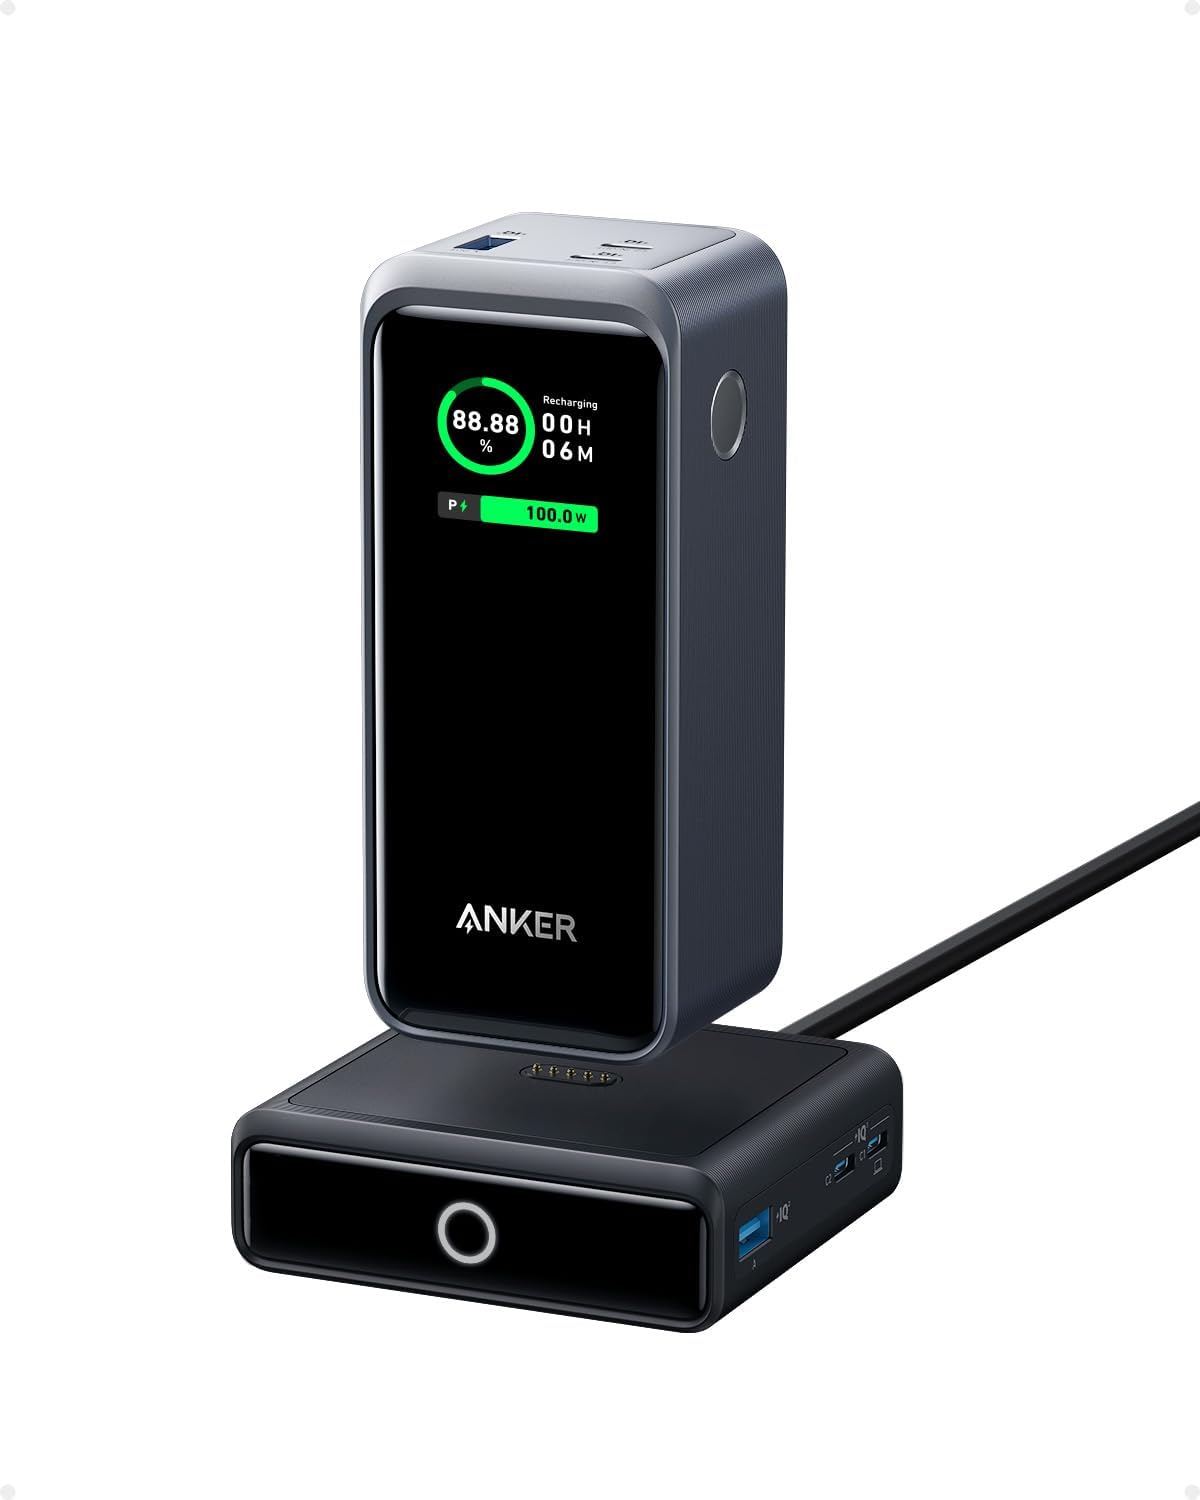 Anker Prime Power Bank 200W, 20,000mAh Portable Charger 3-Port with 100W Charging Base, Smart Digital Display